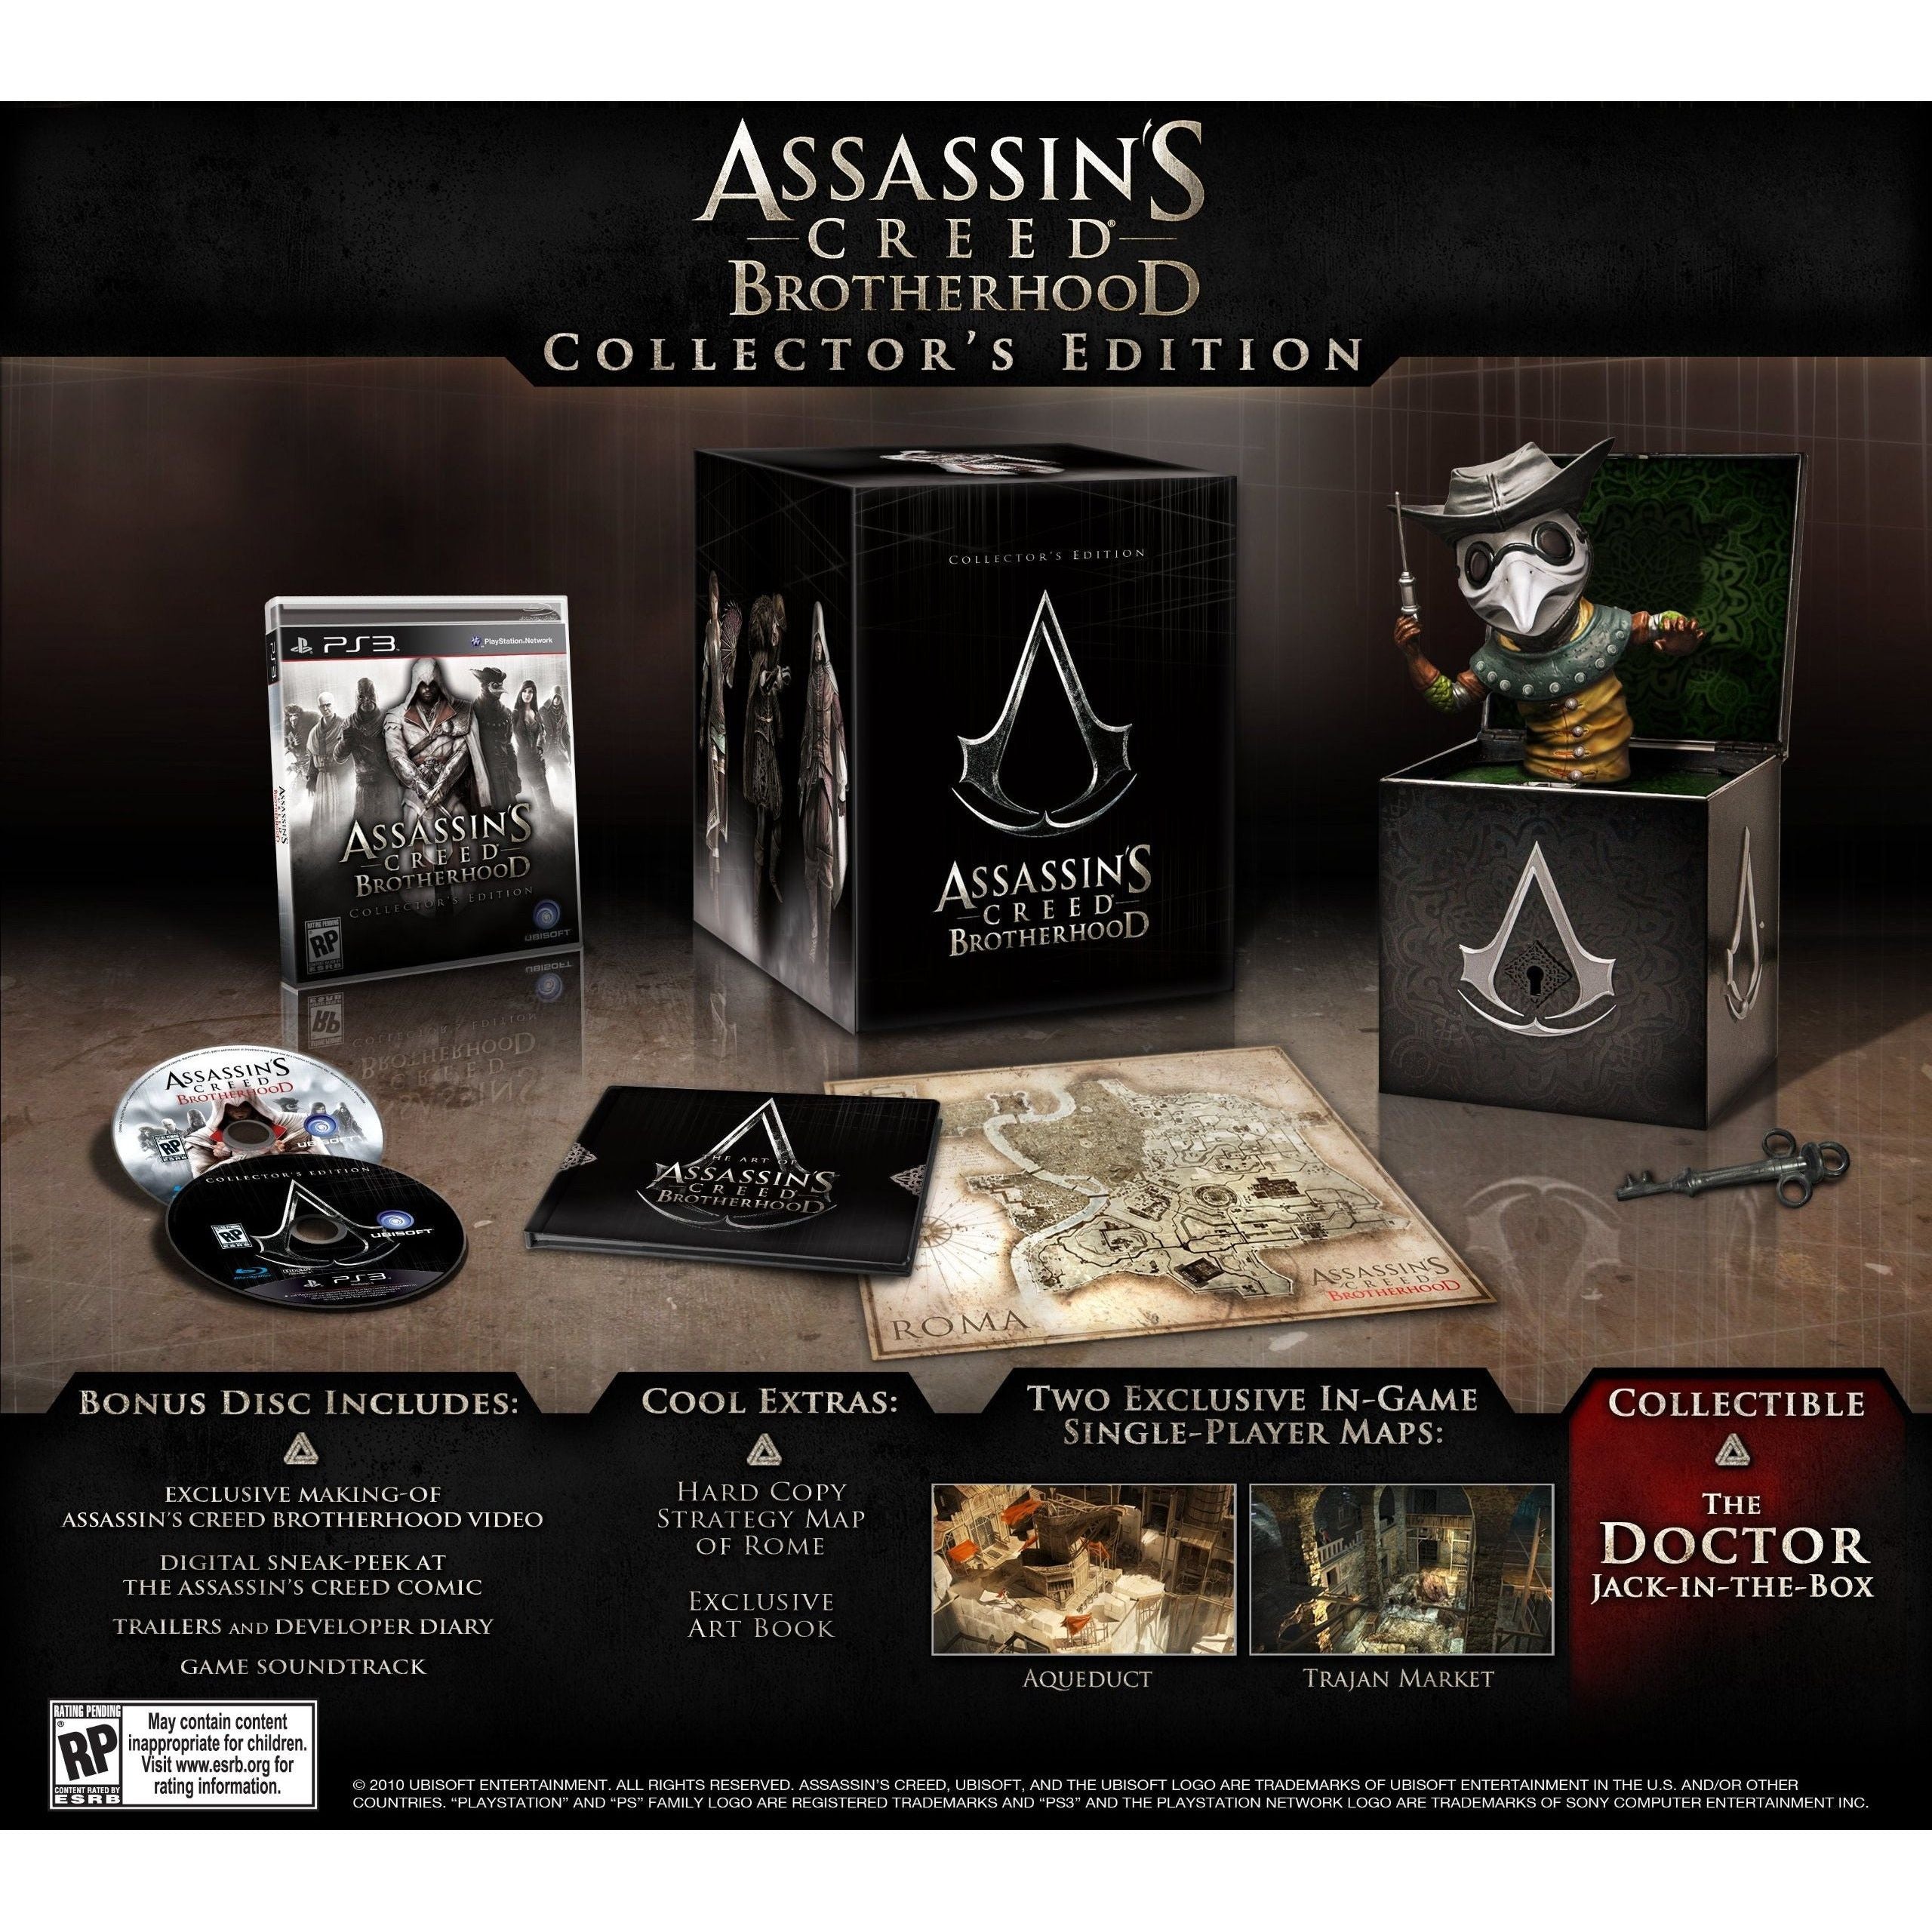 PS3 - Assassin's Creed Brotherhood Collector's Edition